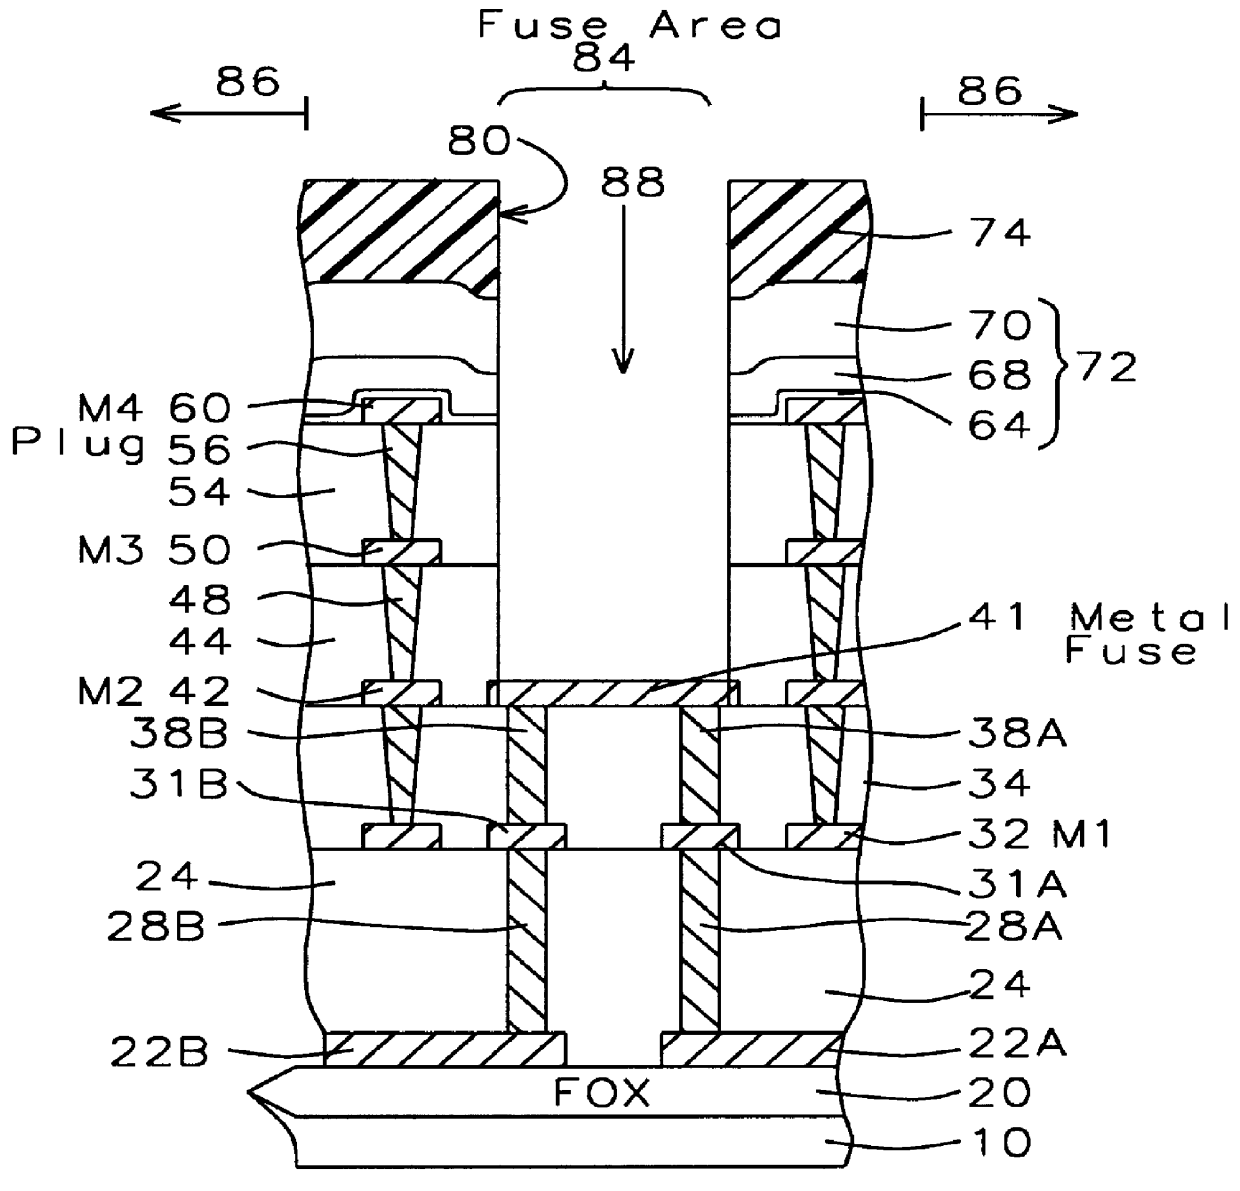 Fabrication of metal fuse design for redundancy technology having a guard ring